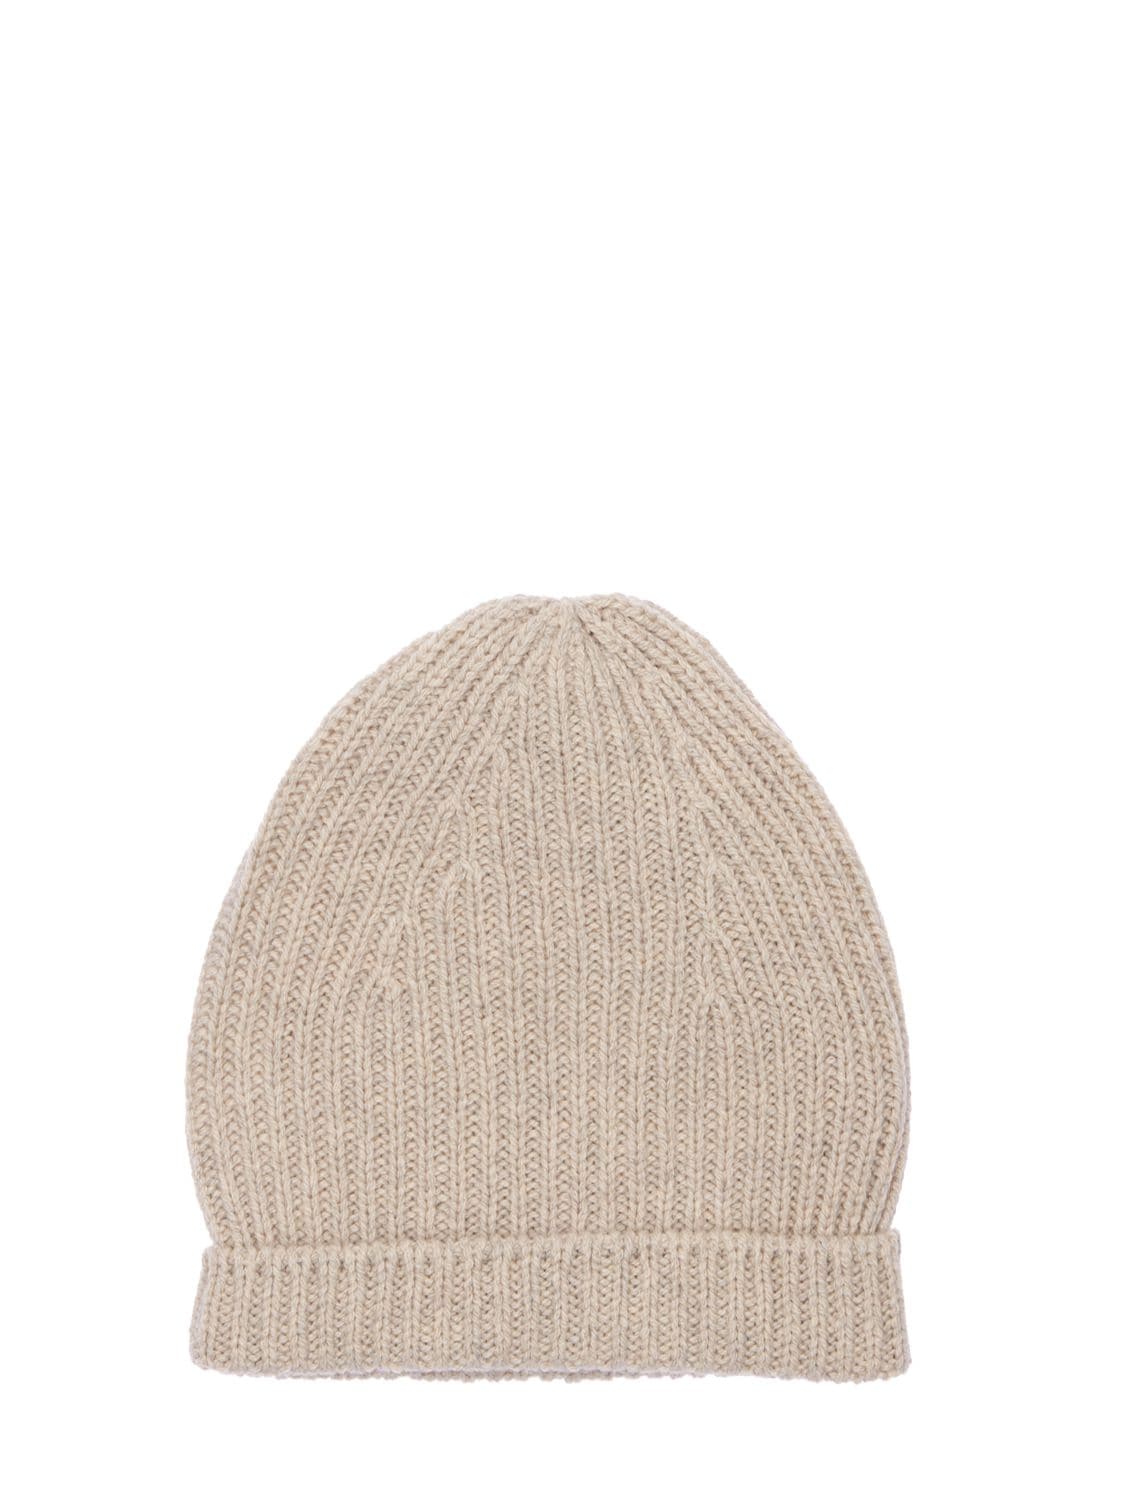 Rick Owens Recycled Cashmere Knit Beanie In Oyster